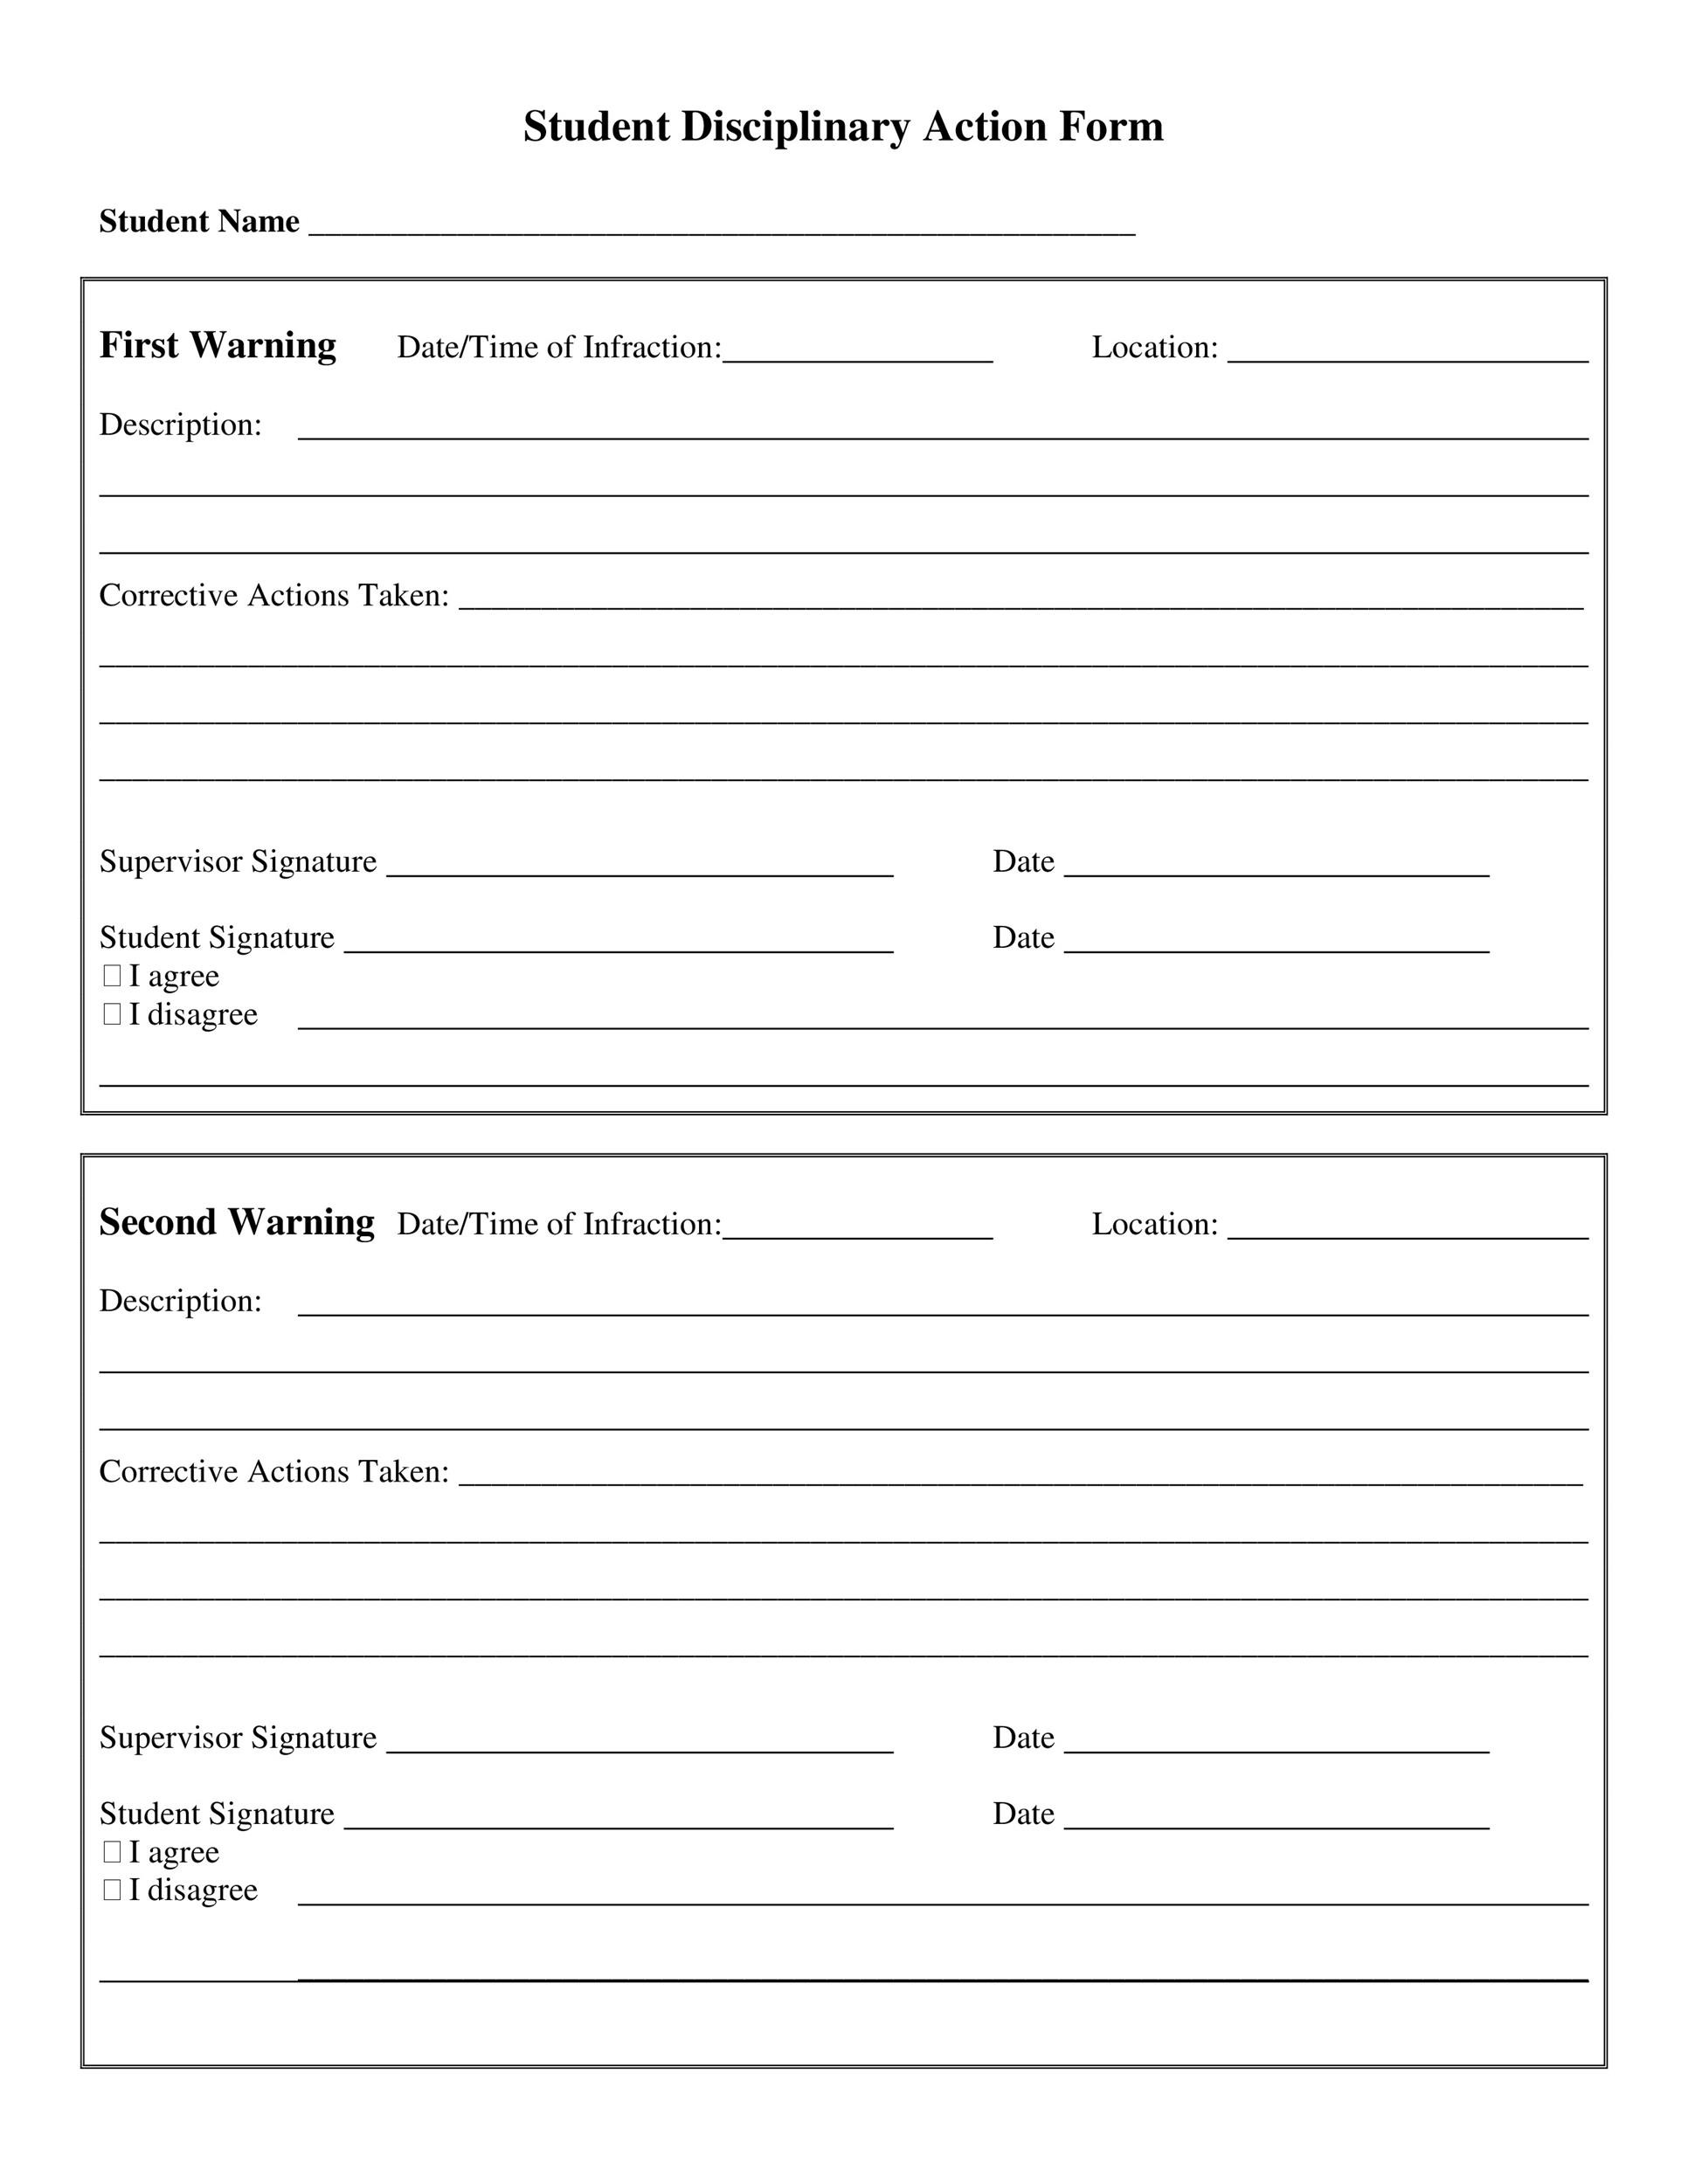 write-up-form-for-school-printable-printable-forms-free-online